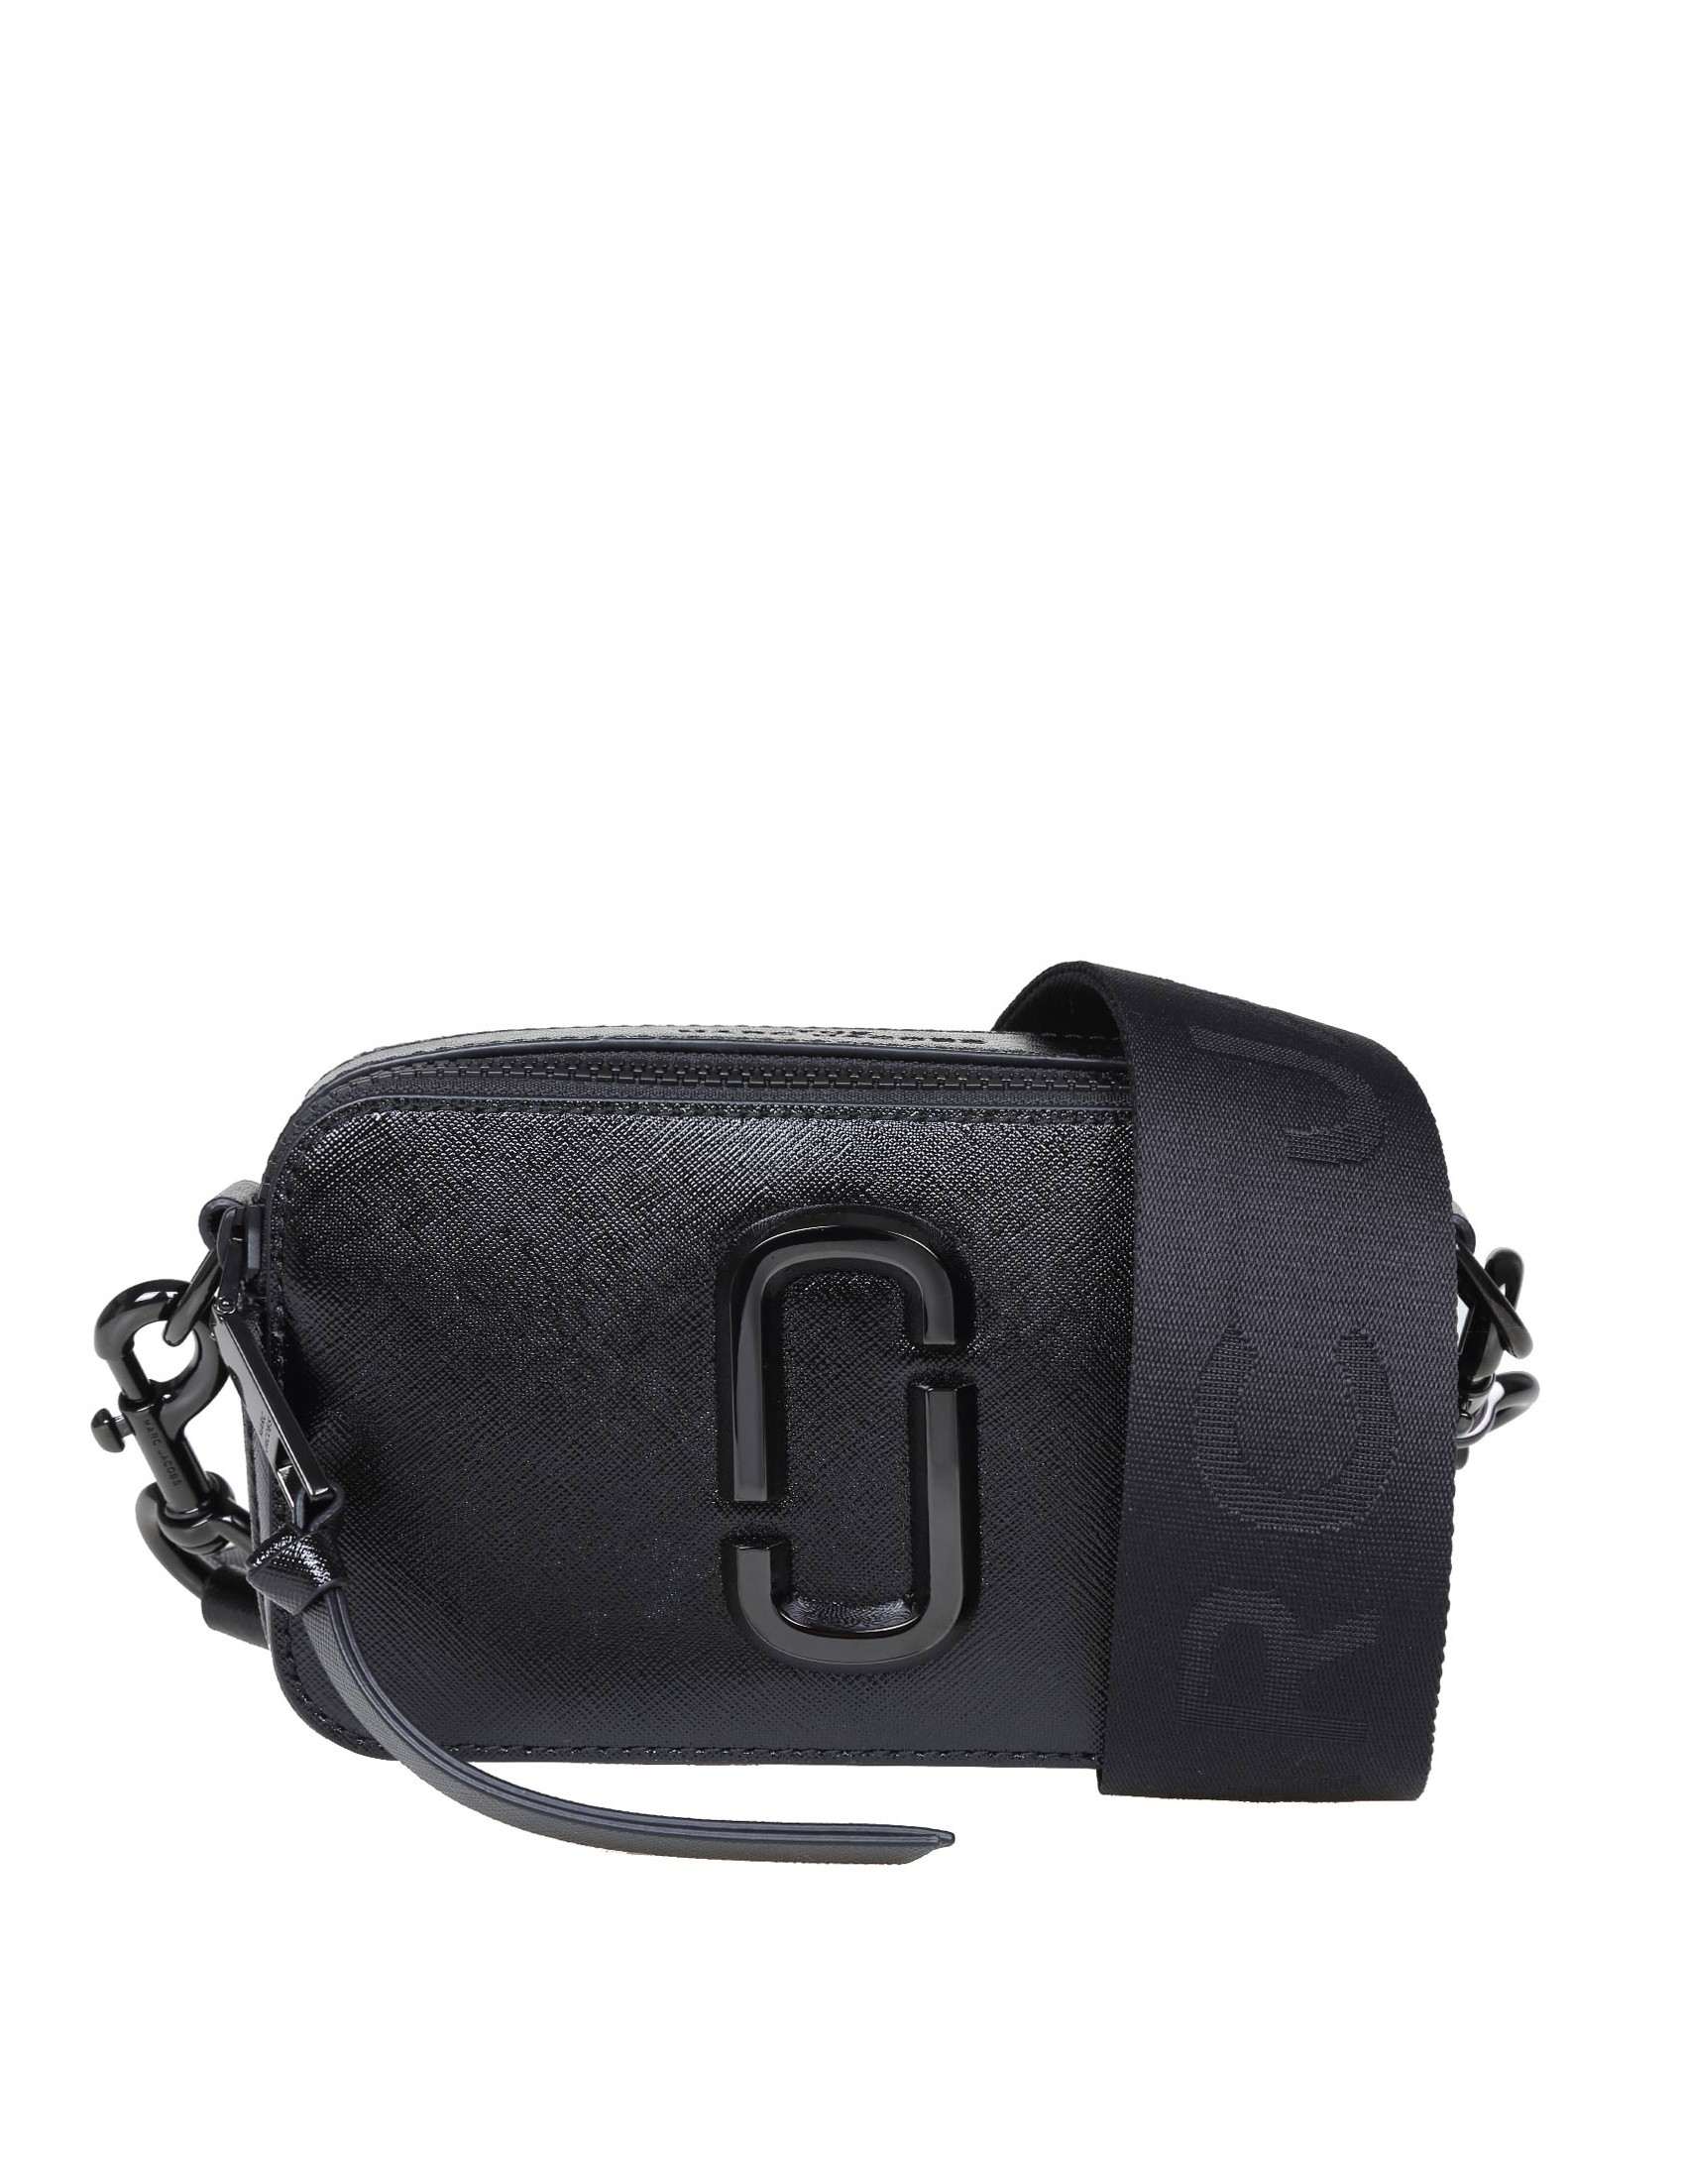 MARC JACOBS SNAPSHOT IN BLACK LEATHER